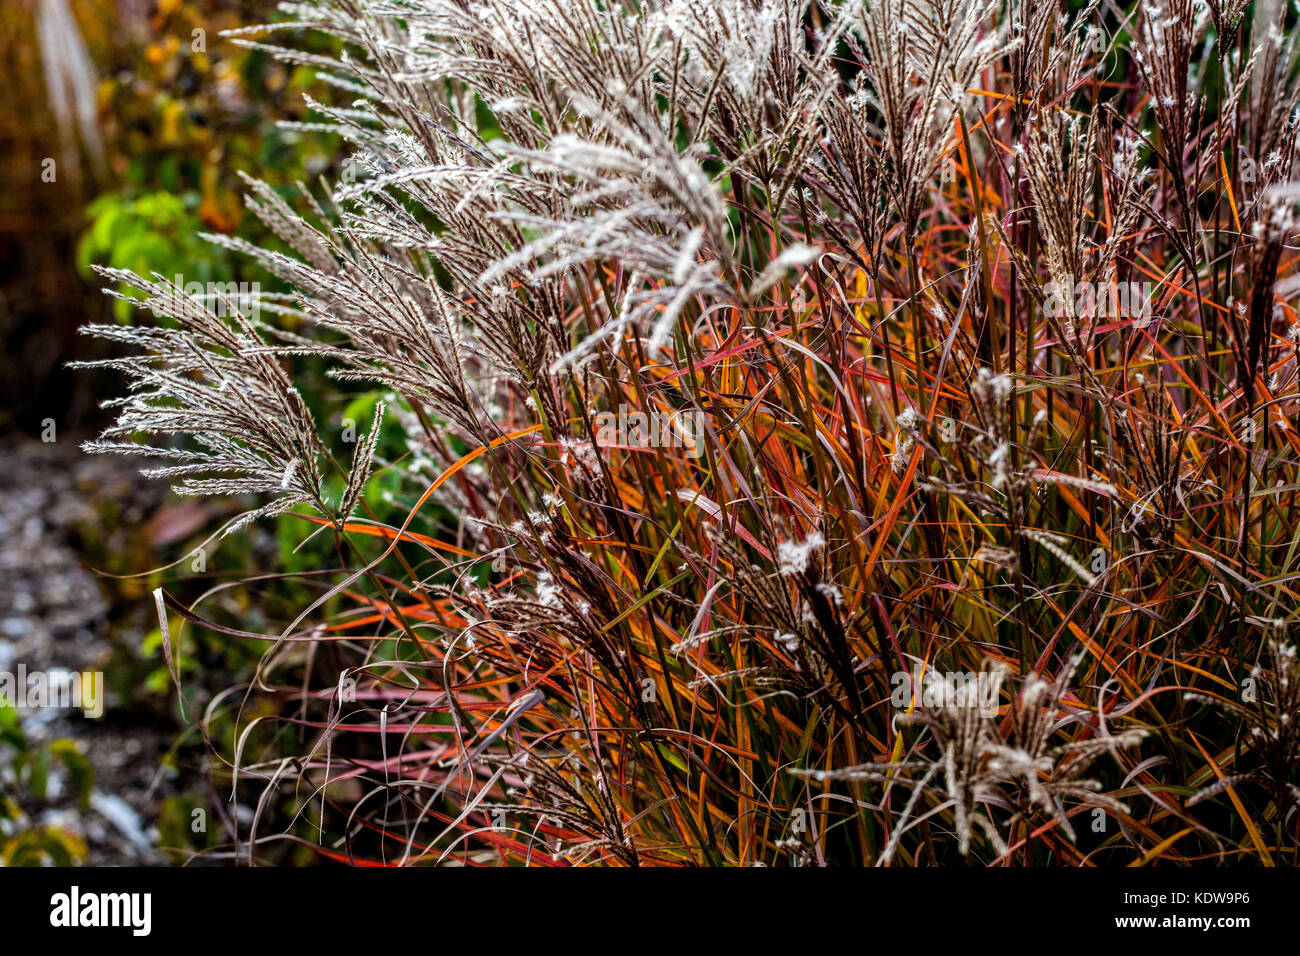 Silvergrass chinois, Miscanthus 'Ferner Osten' jardin d'automne herbe jeune fille naine Banque D'Images